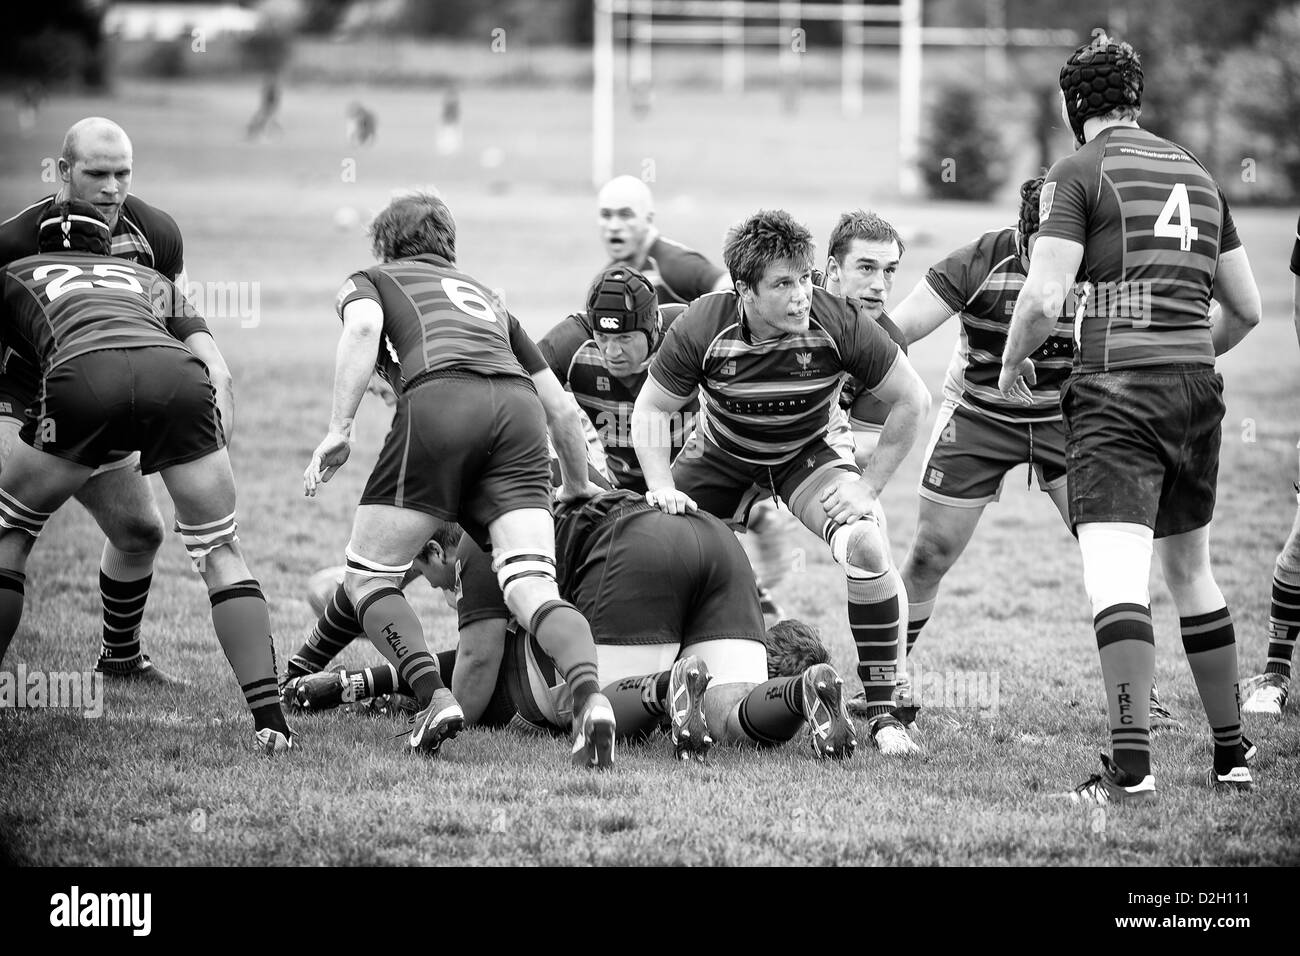 Rugby player stares at opposition player. Stock Photo